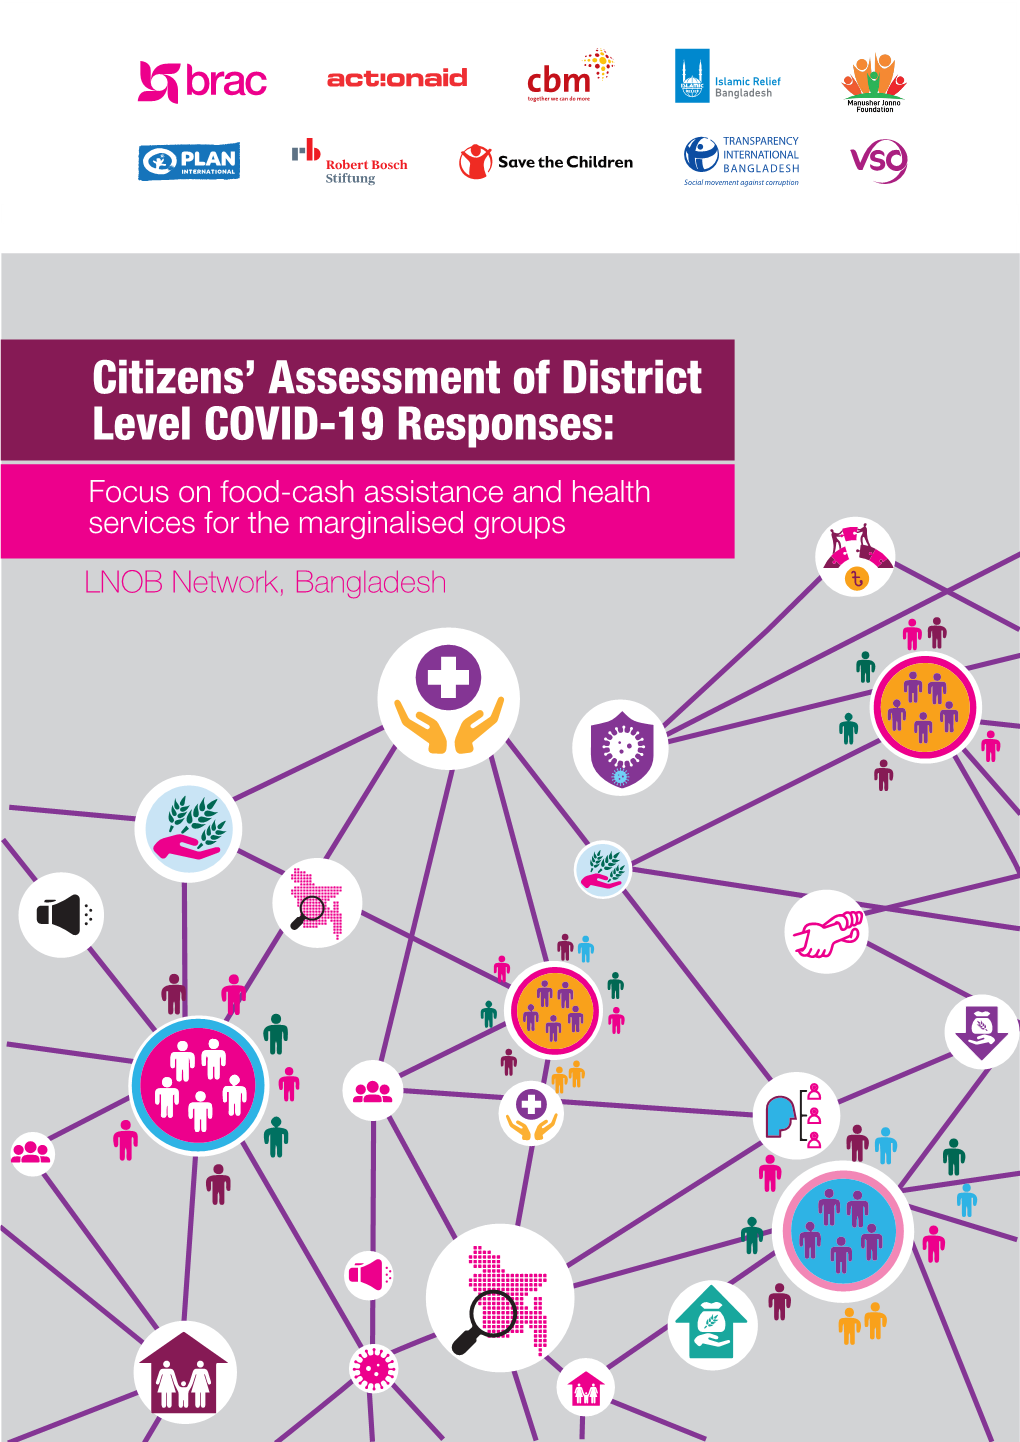 Report: Citizens' Assessment of District Level COVID-19 Responses